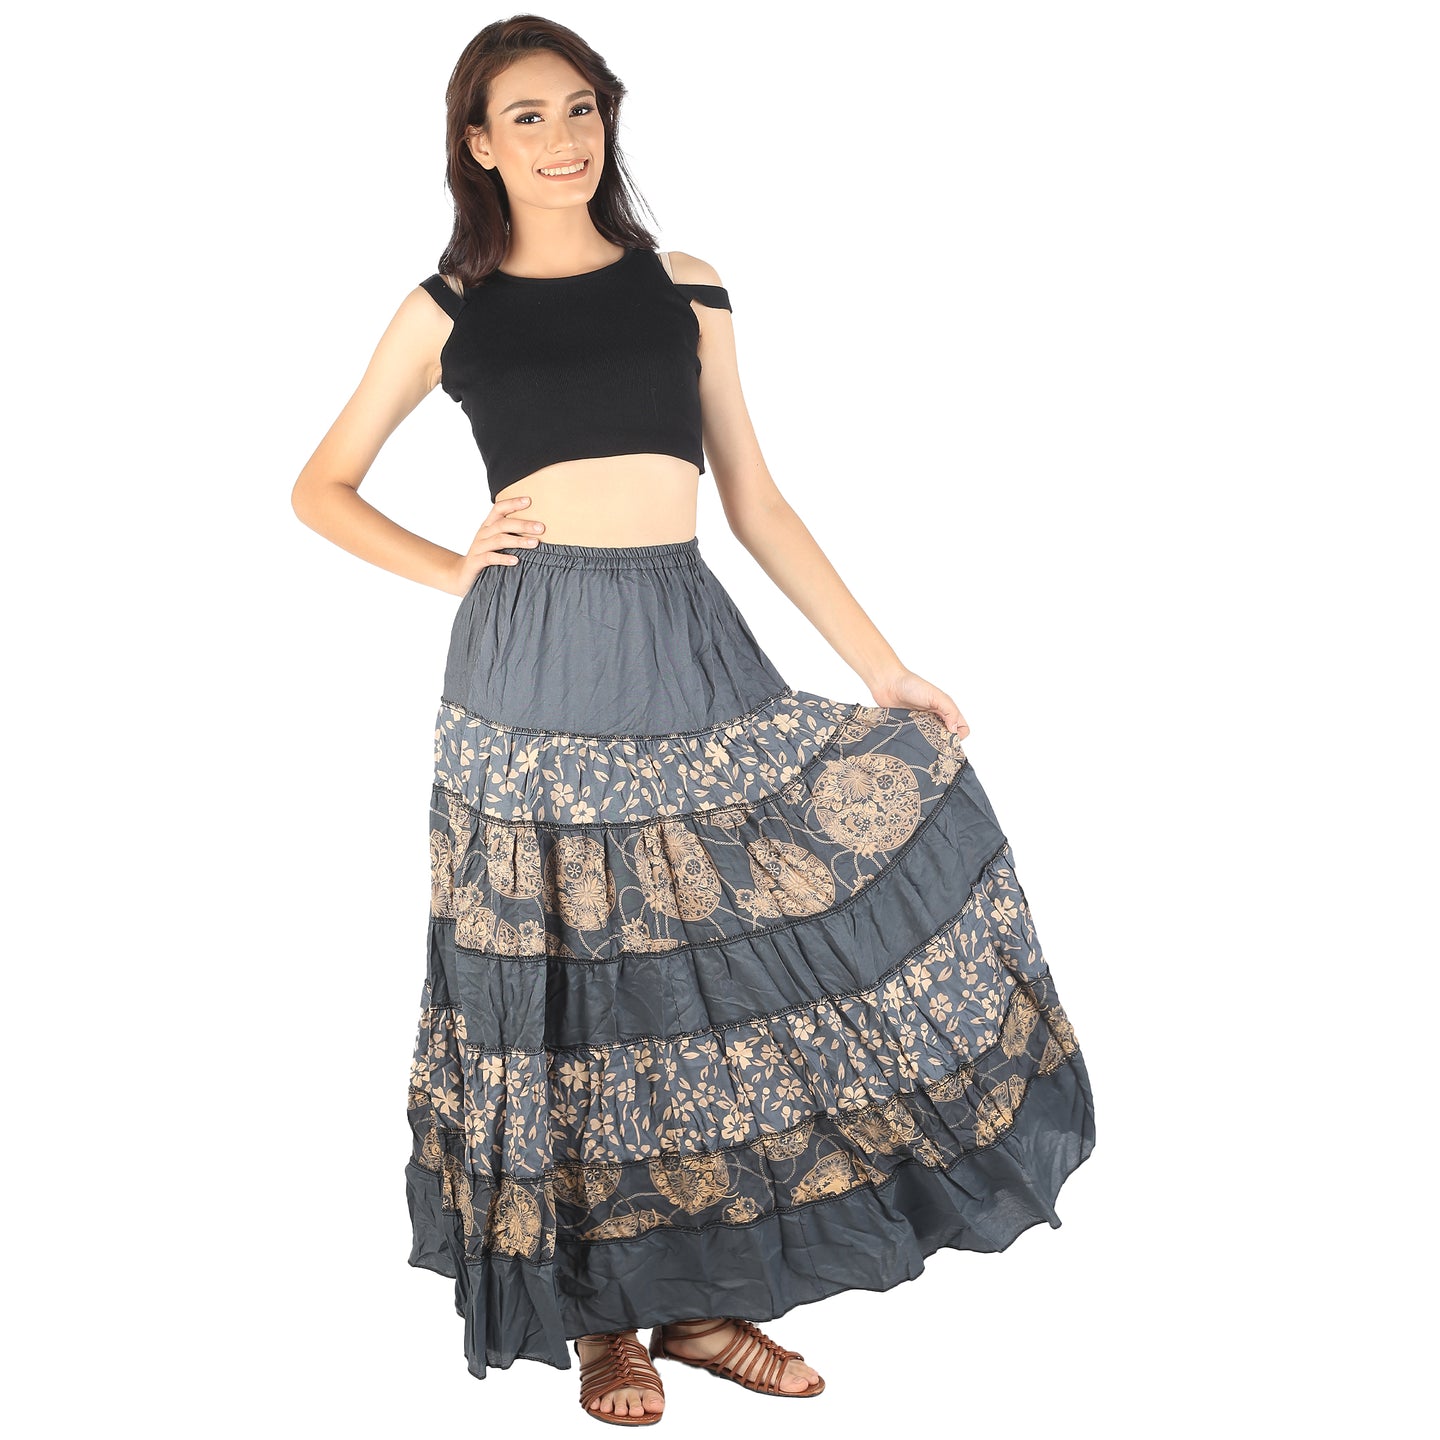 Floral Classic Women Skirts in Gray SK0067 020098 06